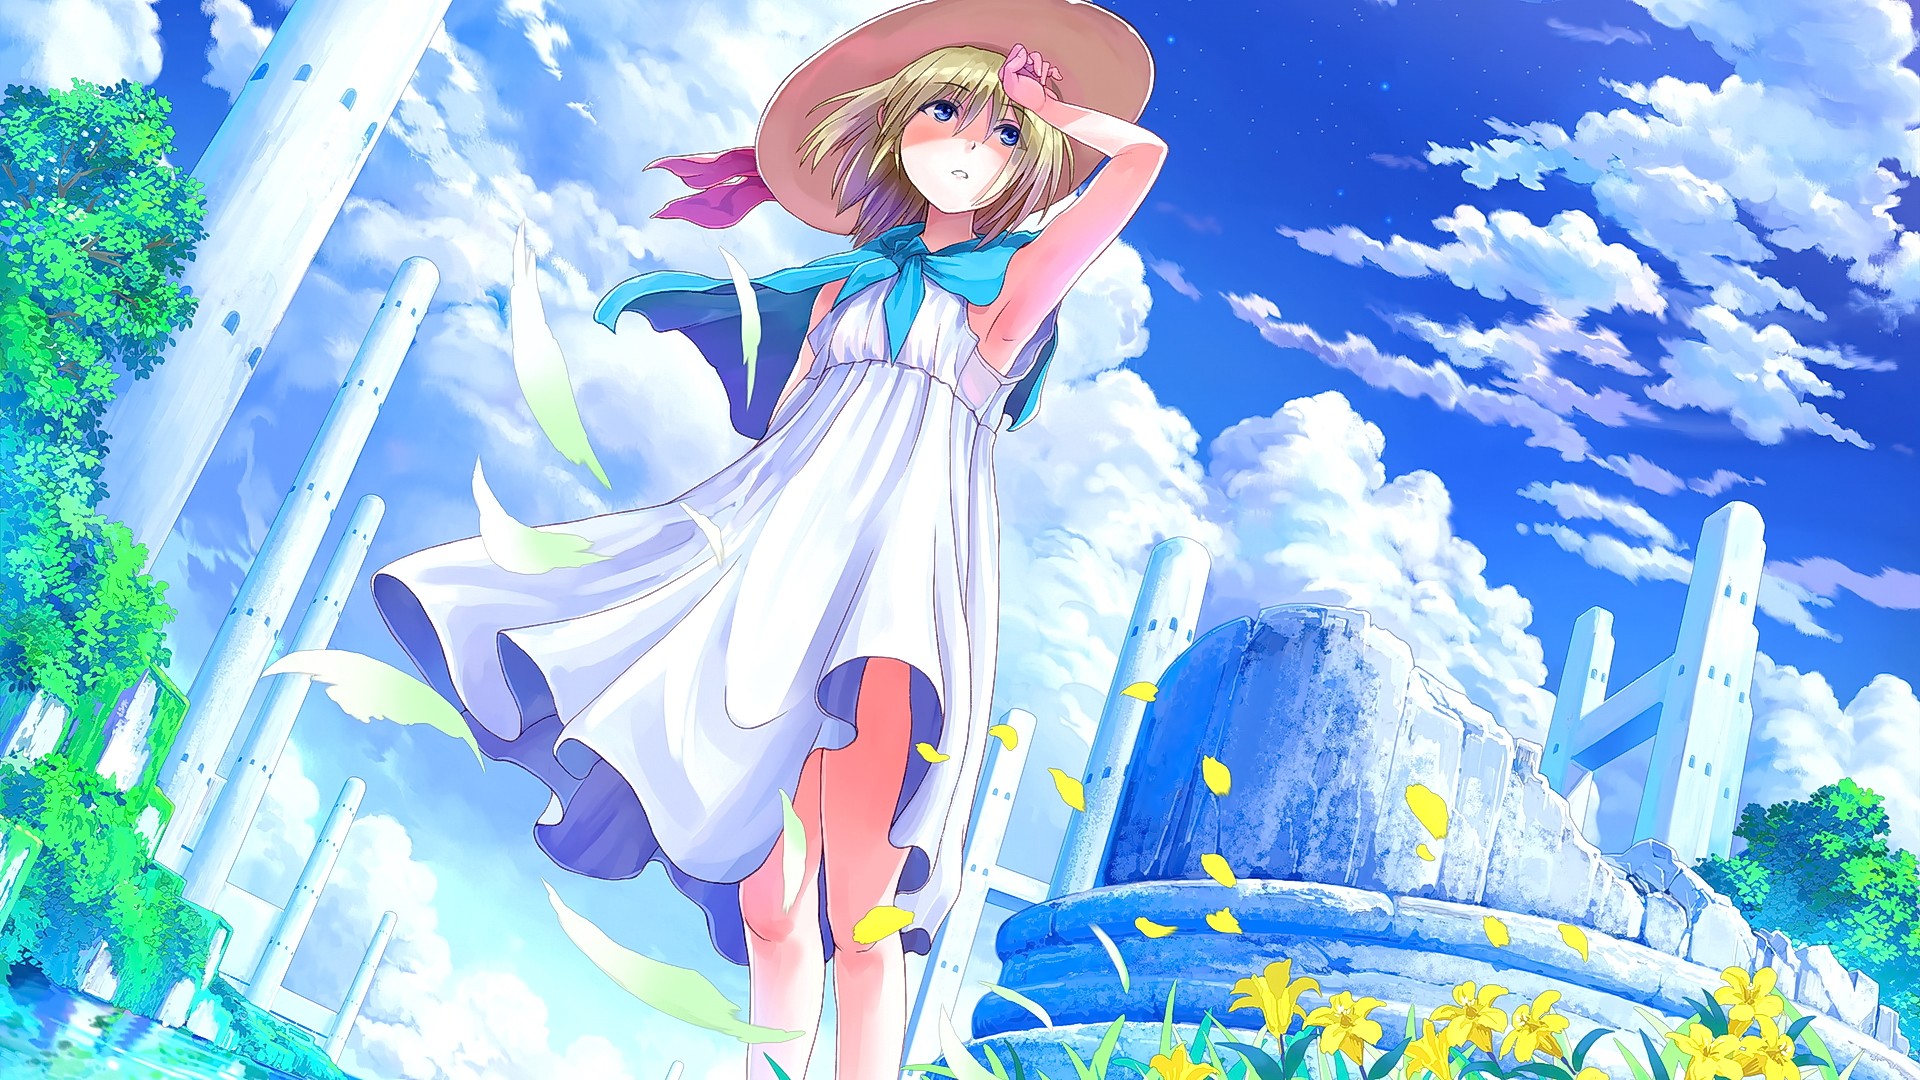 Anime 1920x1080 anime girls anime blonde hat blue eyes looking away sky clouds original characters women with hats dress white dress white clothing shoulder length hair